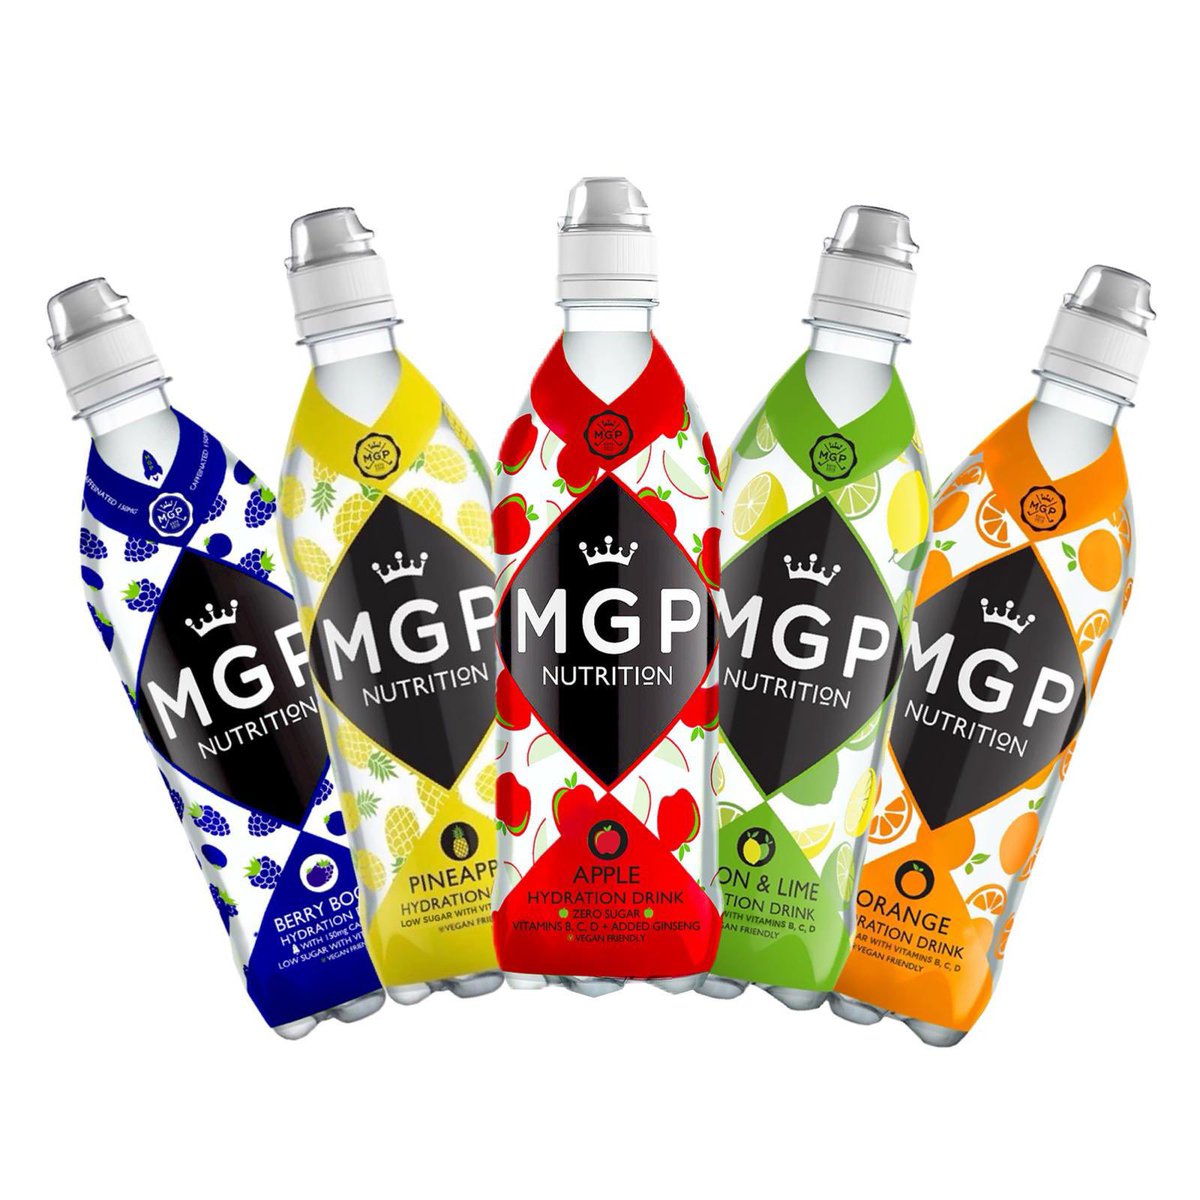 NEW MGP flavour released today 🍎😍⛳️👊🏼 use my Code MEGAN15 to get 15 % OFF MGP @MGPNutrition Fuel to the Max 🫐🍎🍊🍋🍍#fueltothemax #MGPNutrition Stock up for summer ☀️